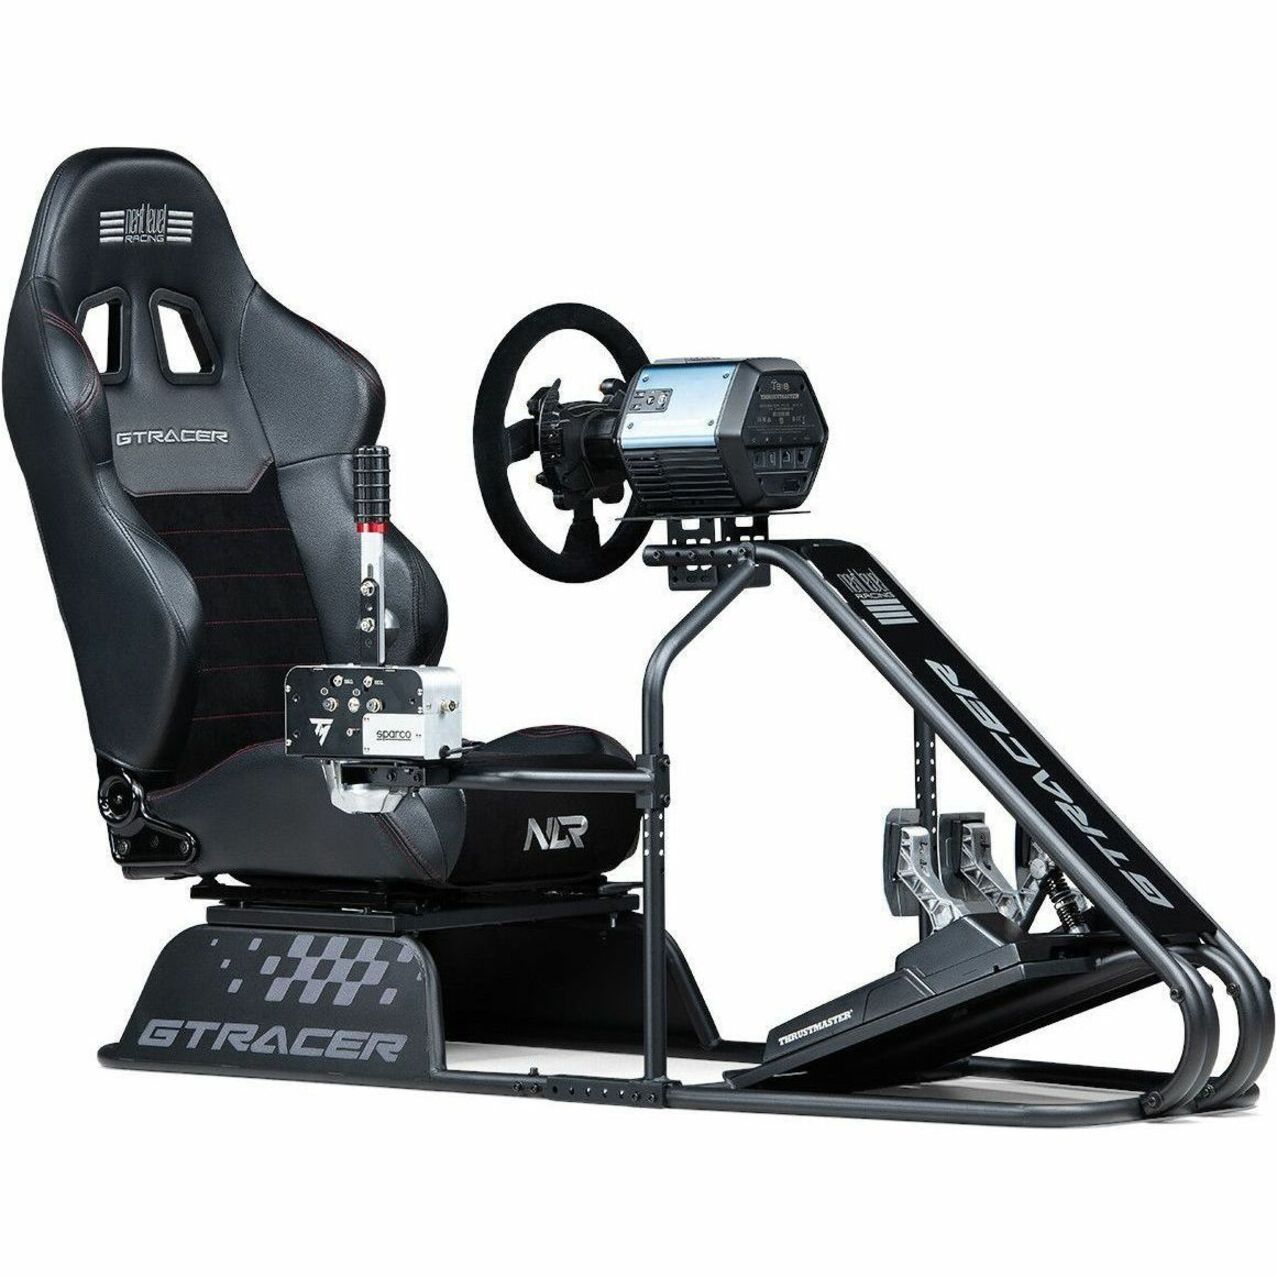 GTRacer Racing Cockpit Next Level Gaming (NLR-R001)